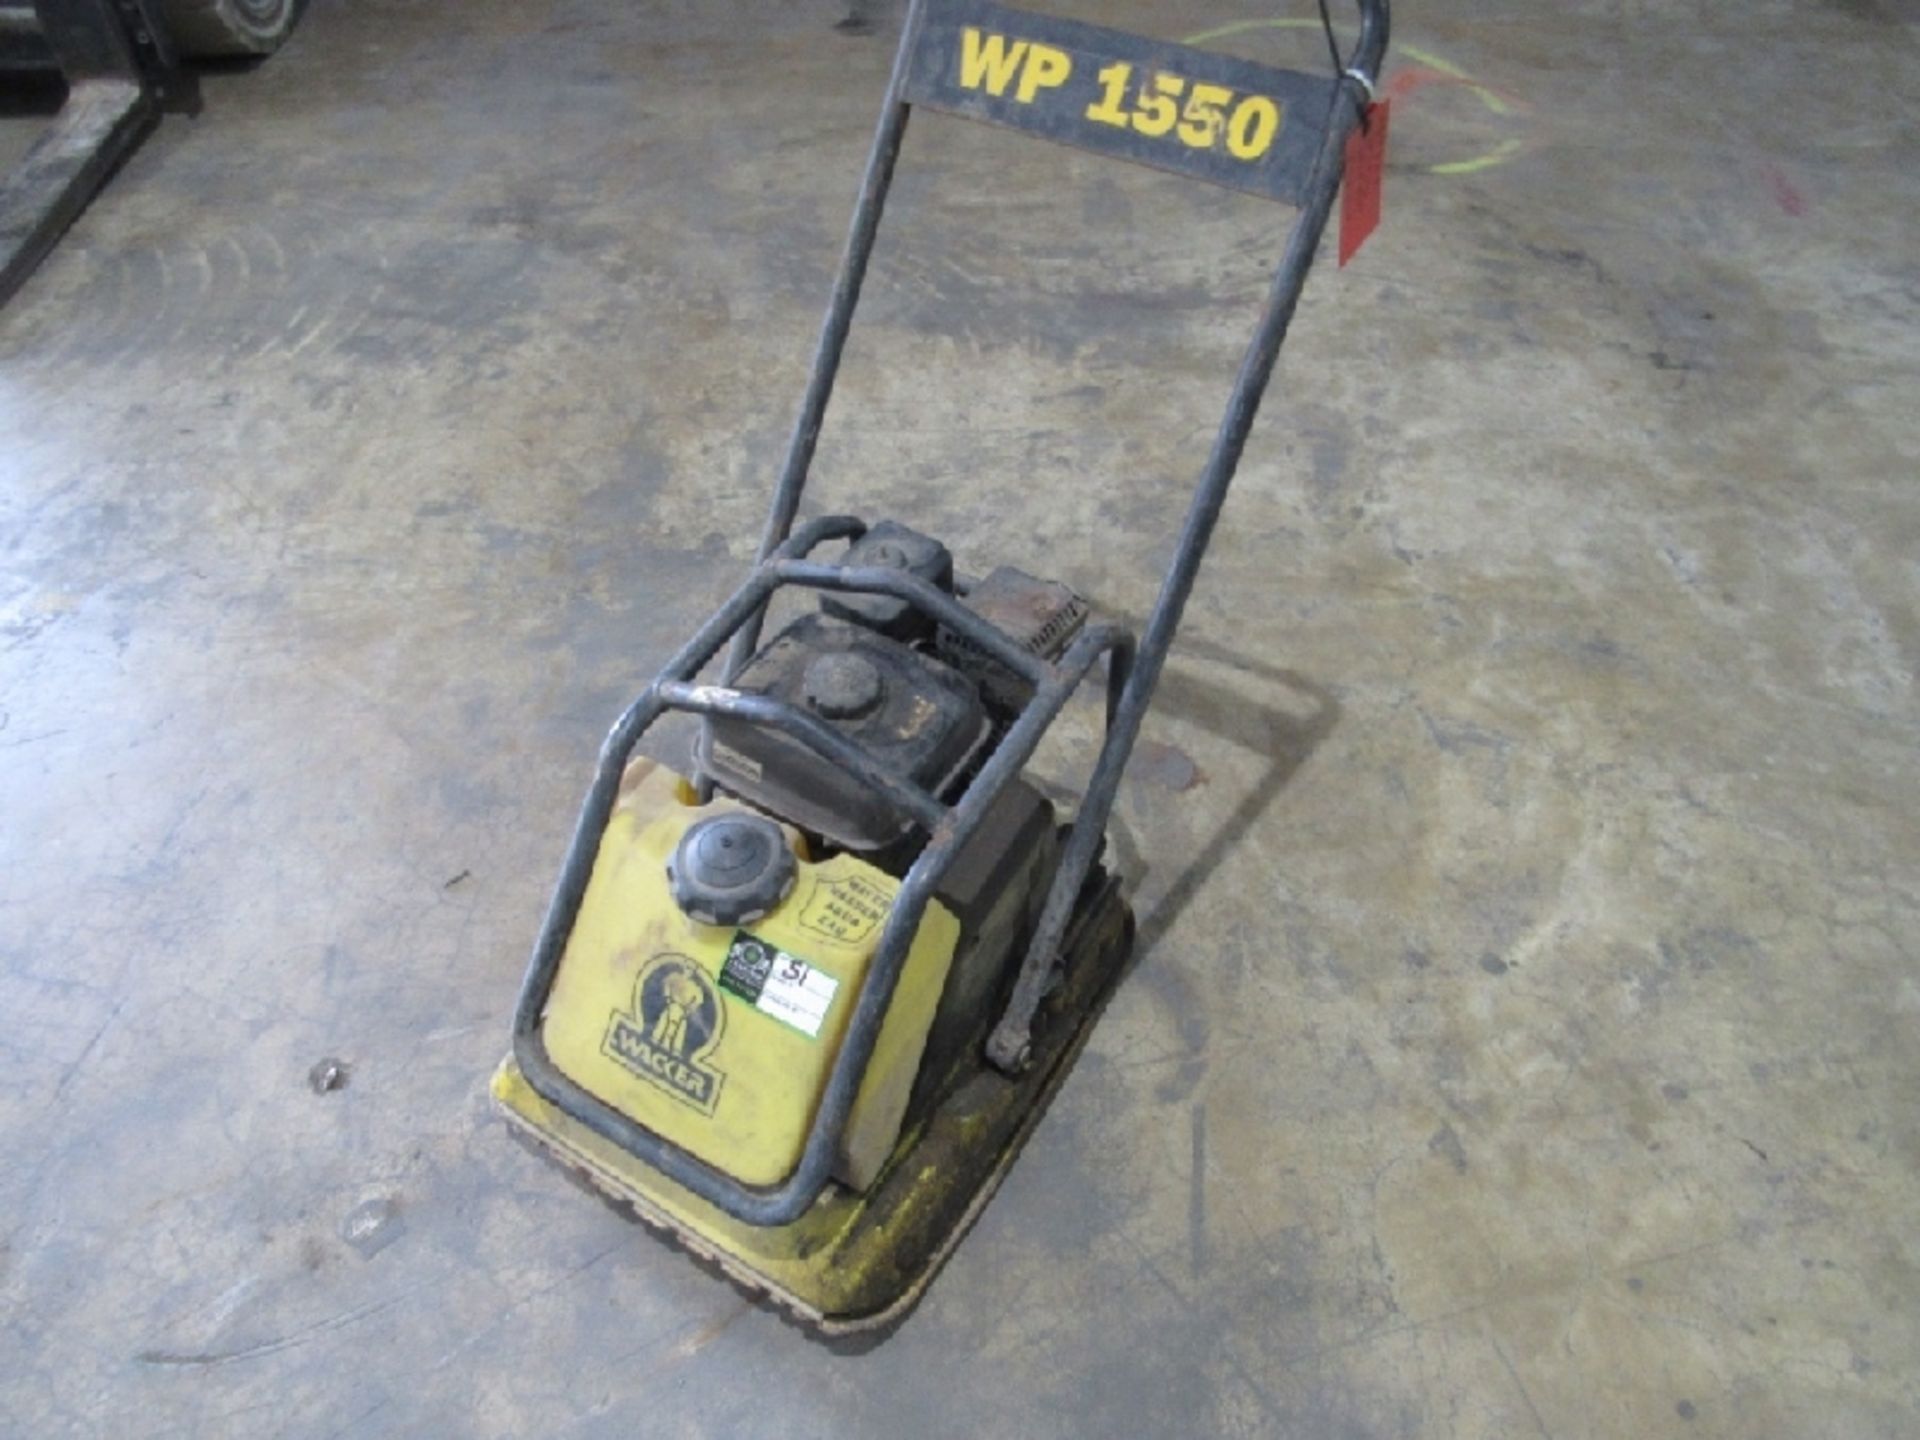 Single Plate Compactor- ***Located in Chattanooga, TN*** MFR - Wacker Model - WP 1550 *No Draw